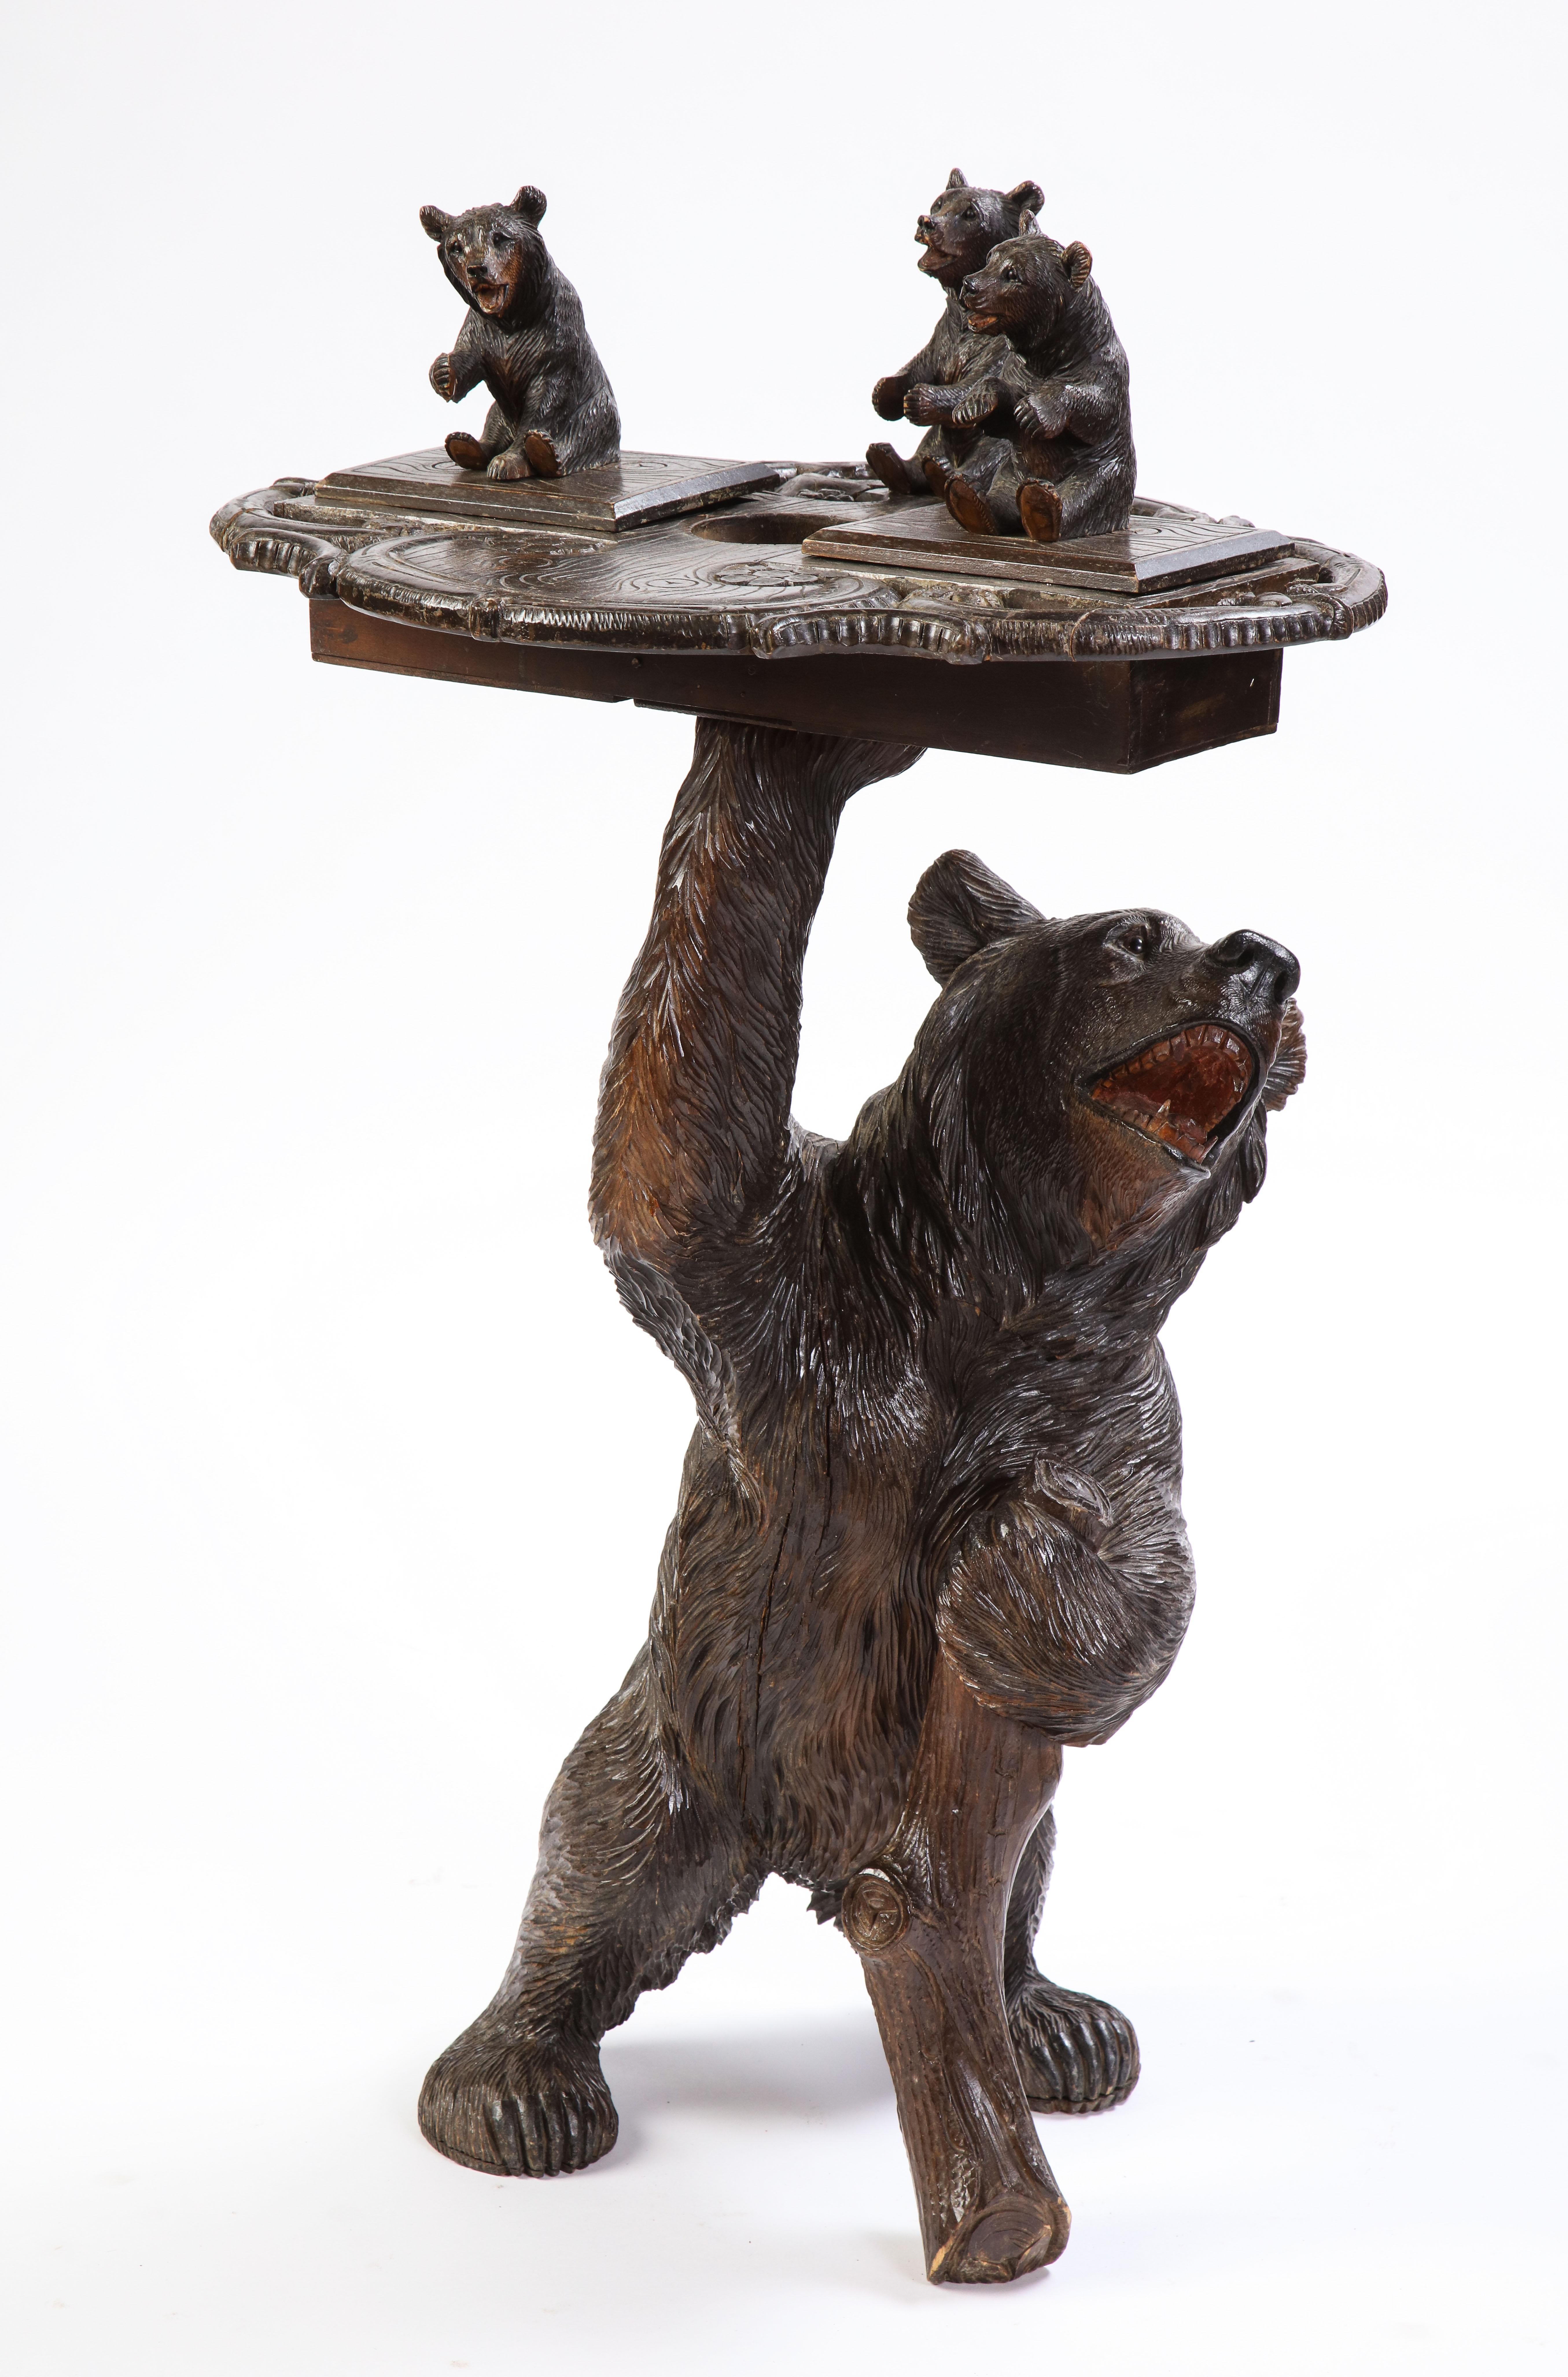 Swiss 'Black Forest' smoking stand, early 20th century. An oval pierced top with two hinged tobacco wells and three seated bears, below the naturalistic column, supported by a standing bear with a hinged head. 

The table's standard is in the form